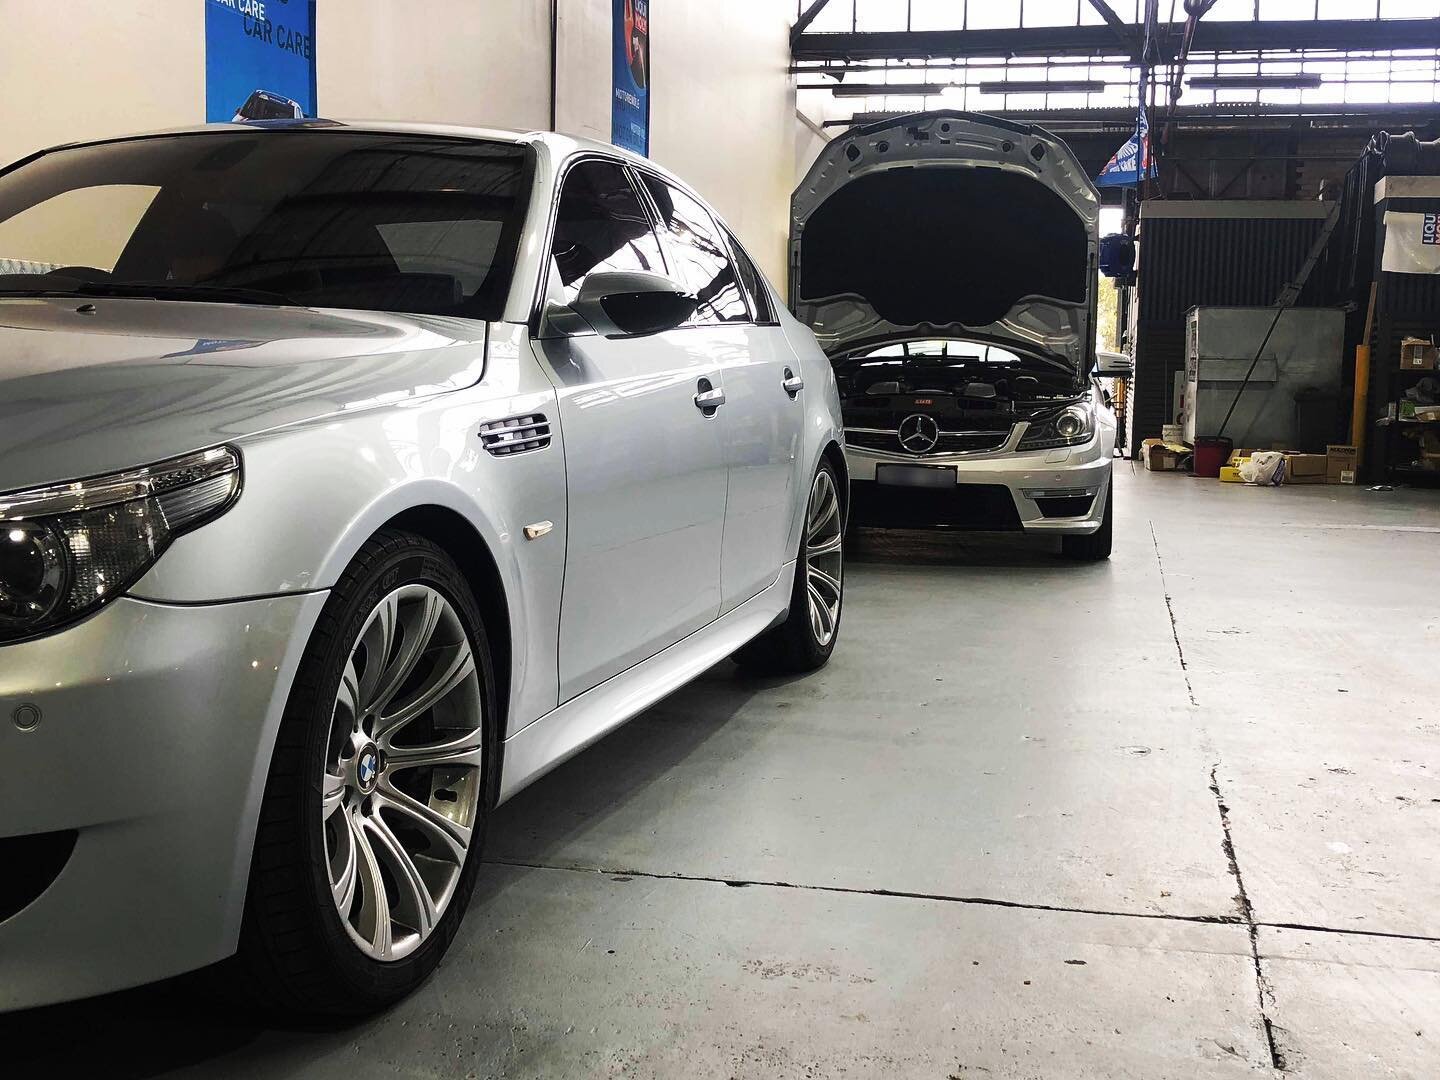 BMW V10 Saloon never looked so good from this angle.

After a bit more power from your BMW M? Contact us today to see what performance option we have available for you.
|93874440||service@worxauto.com.au|

We are still taking hygiene measures to mini